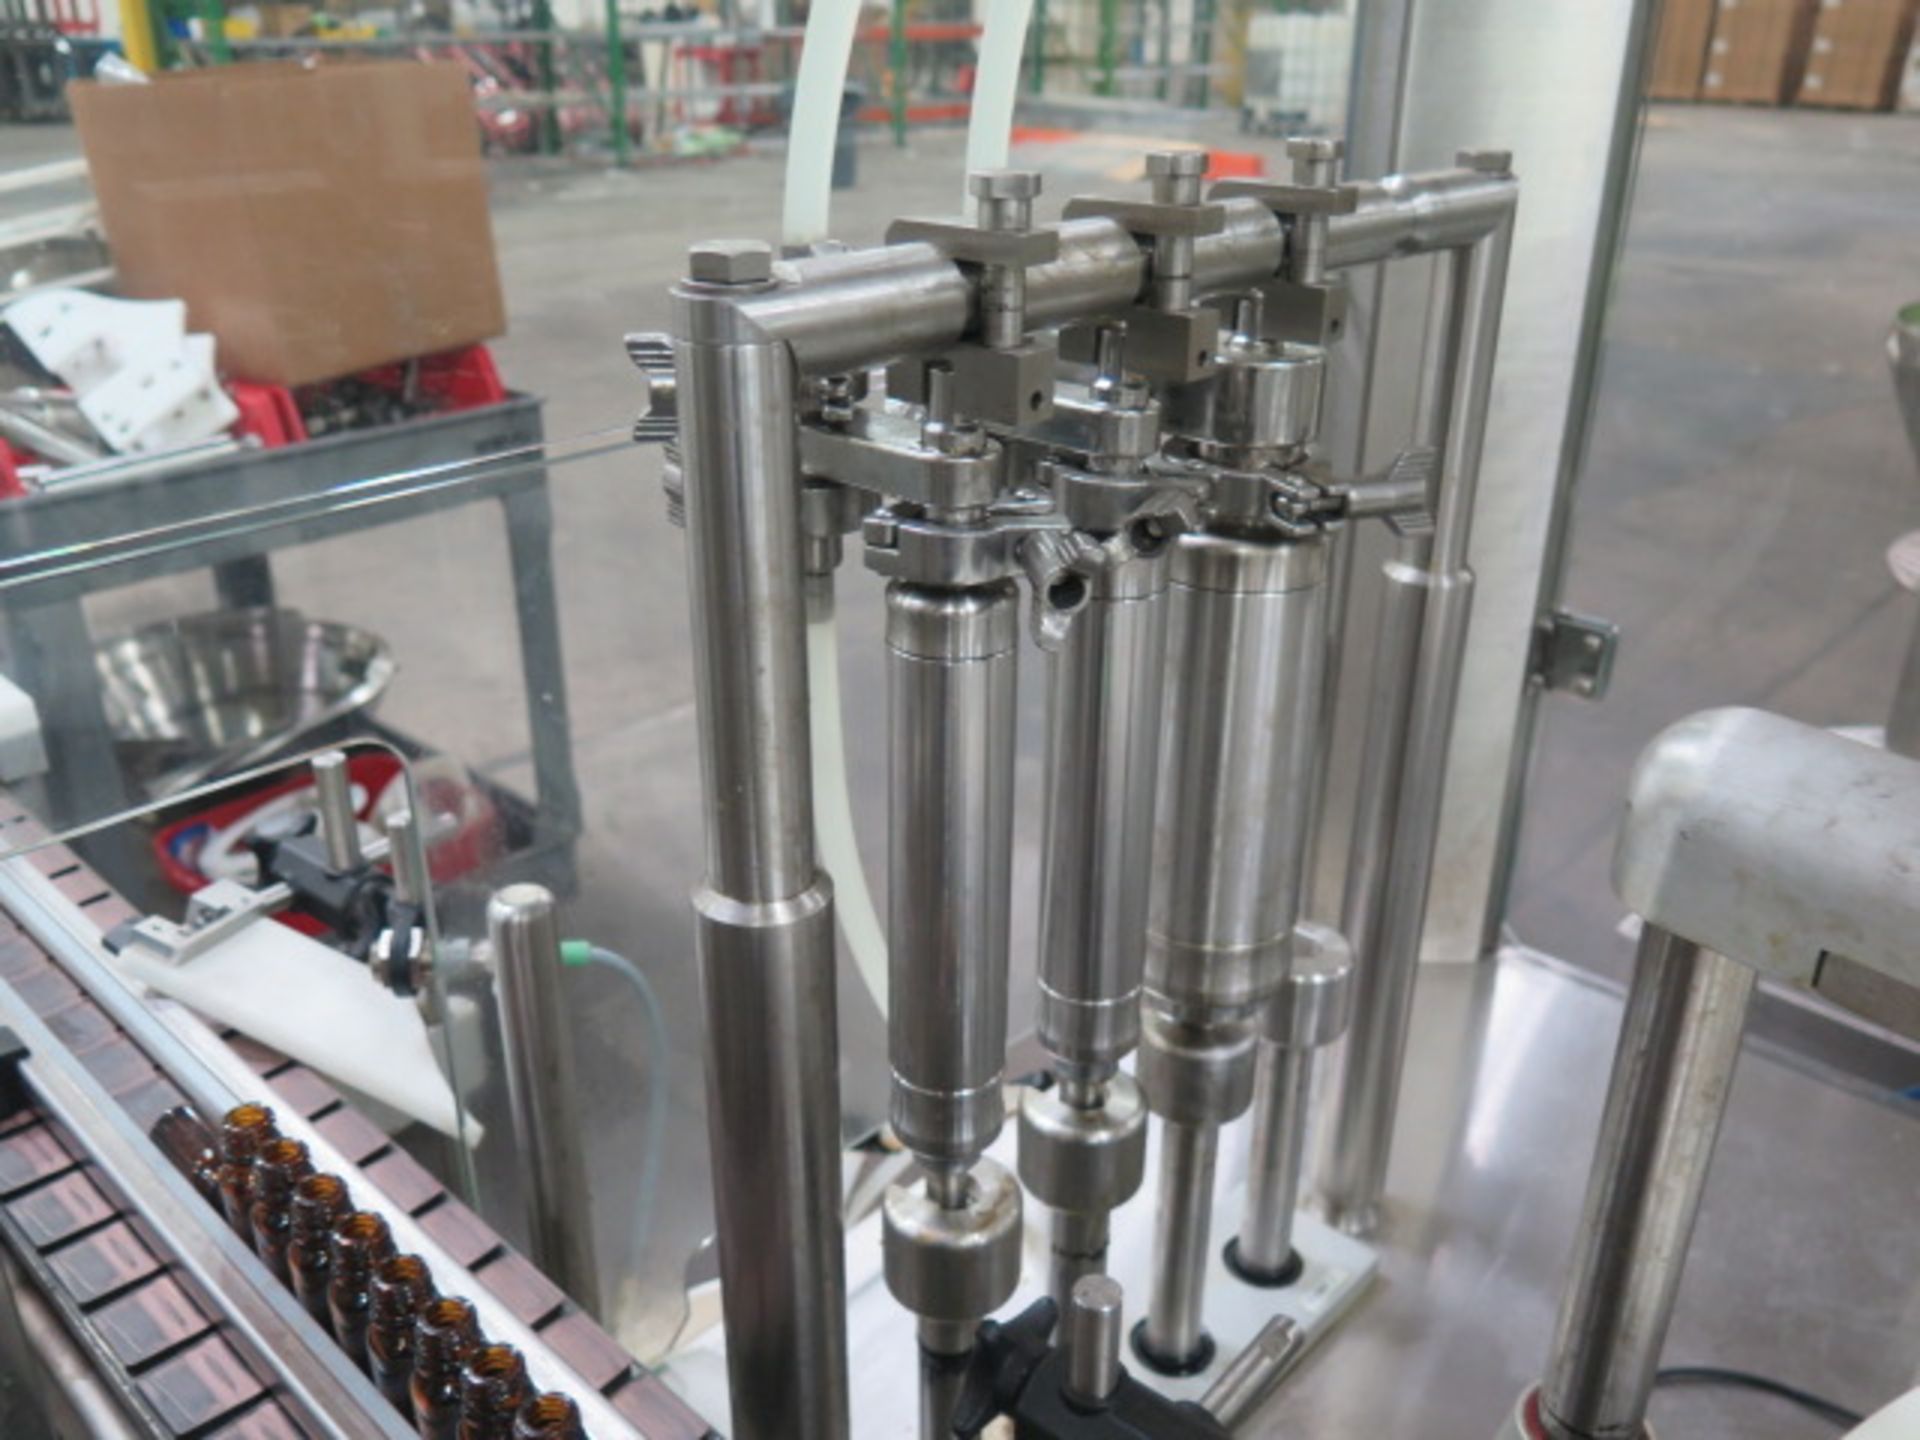 Line 5 : 2019 Capmatic “Patriot” Filling and Capping Line w/ Capmatic PLC Controls, SOLD AS IS - Image 10 of 38